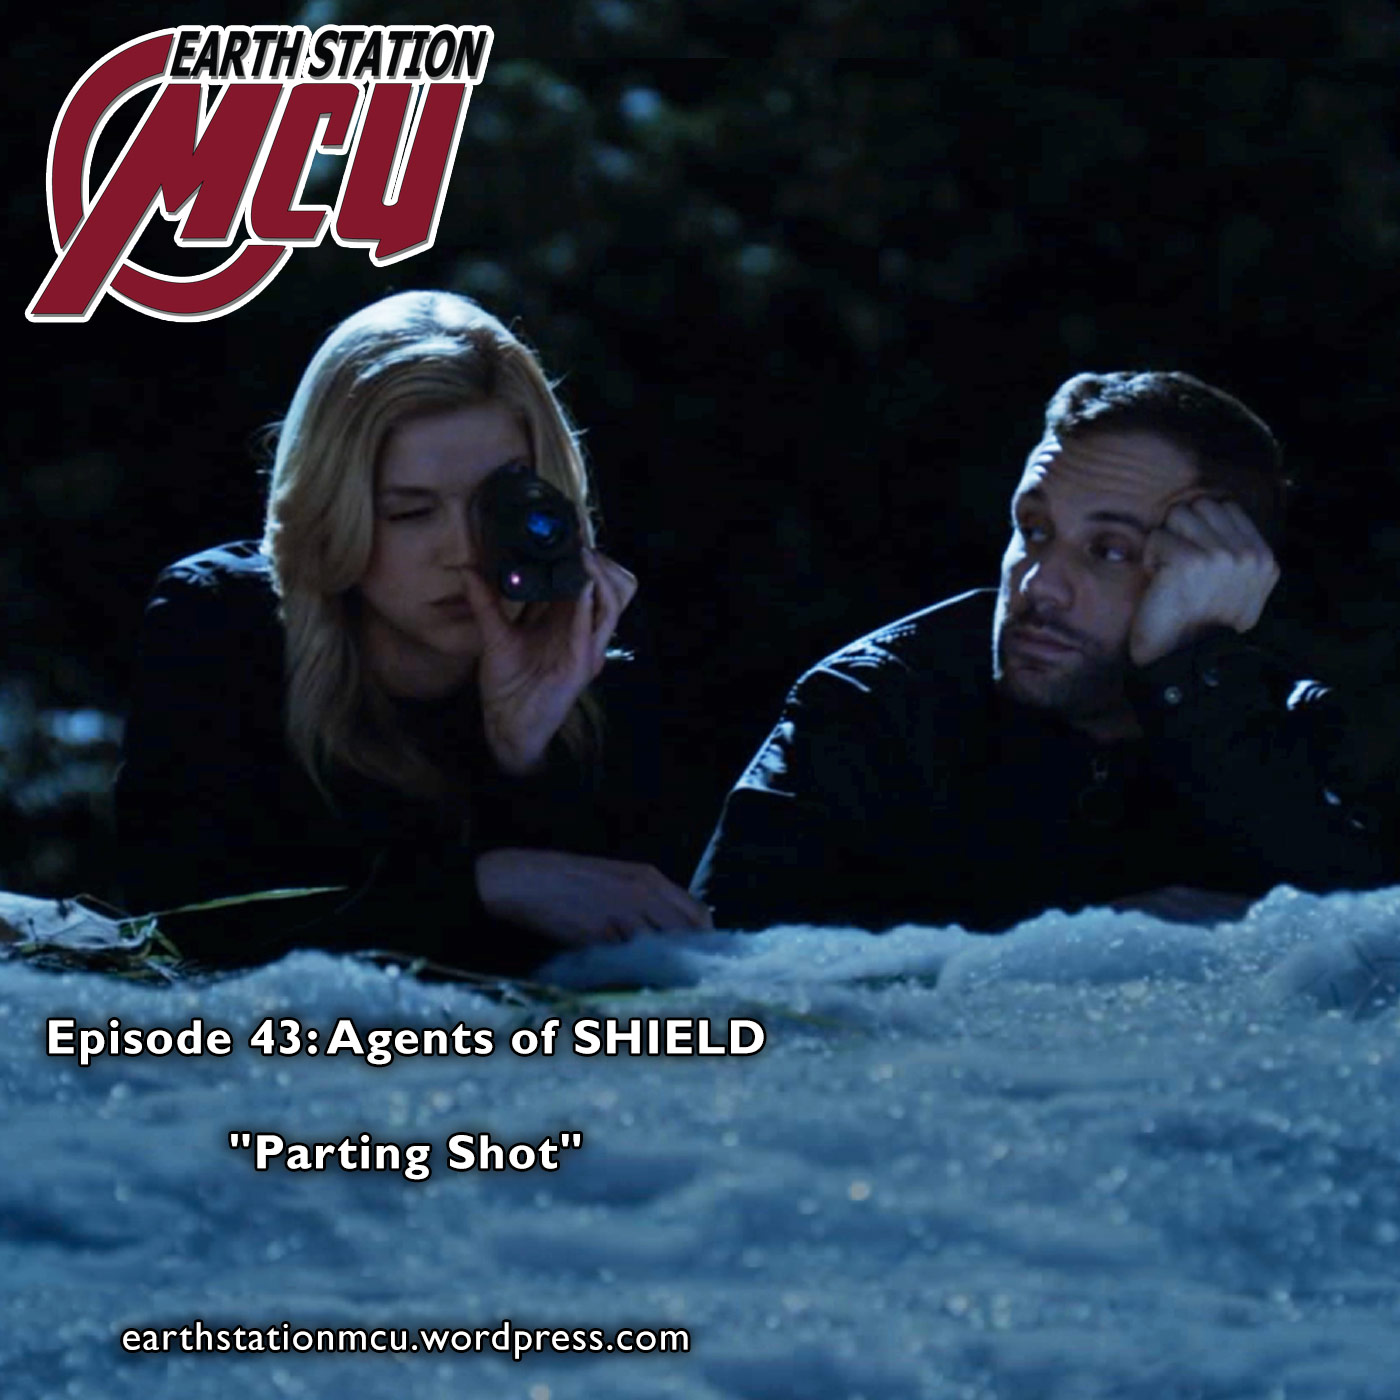 Earth Station MCU: Episode 43 - Agents of SHIELD "Parting Shot"